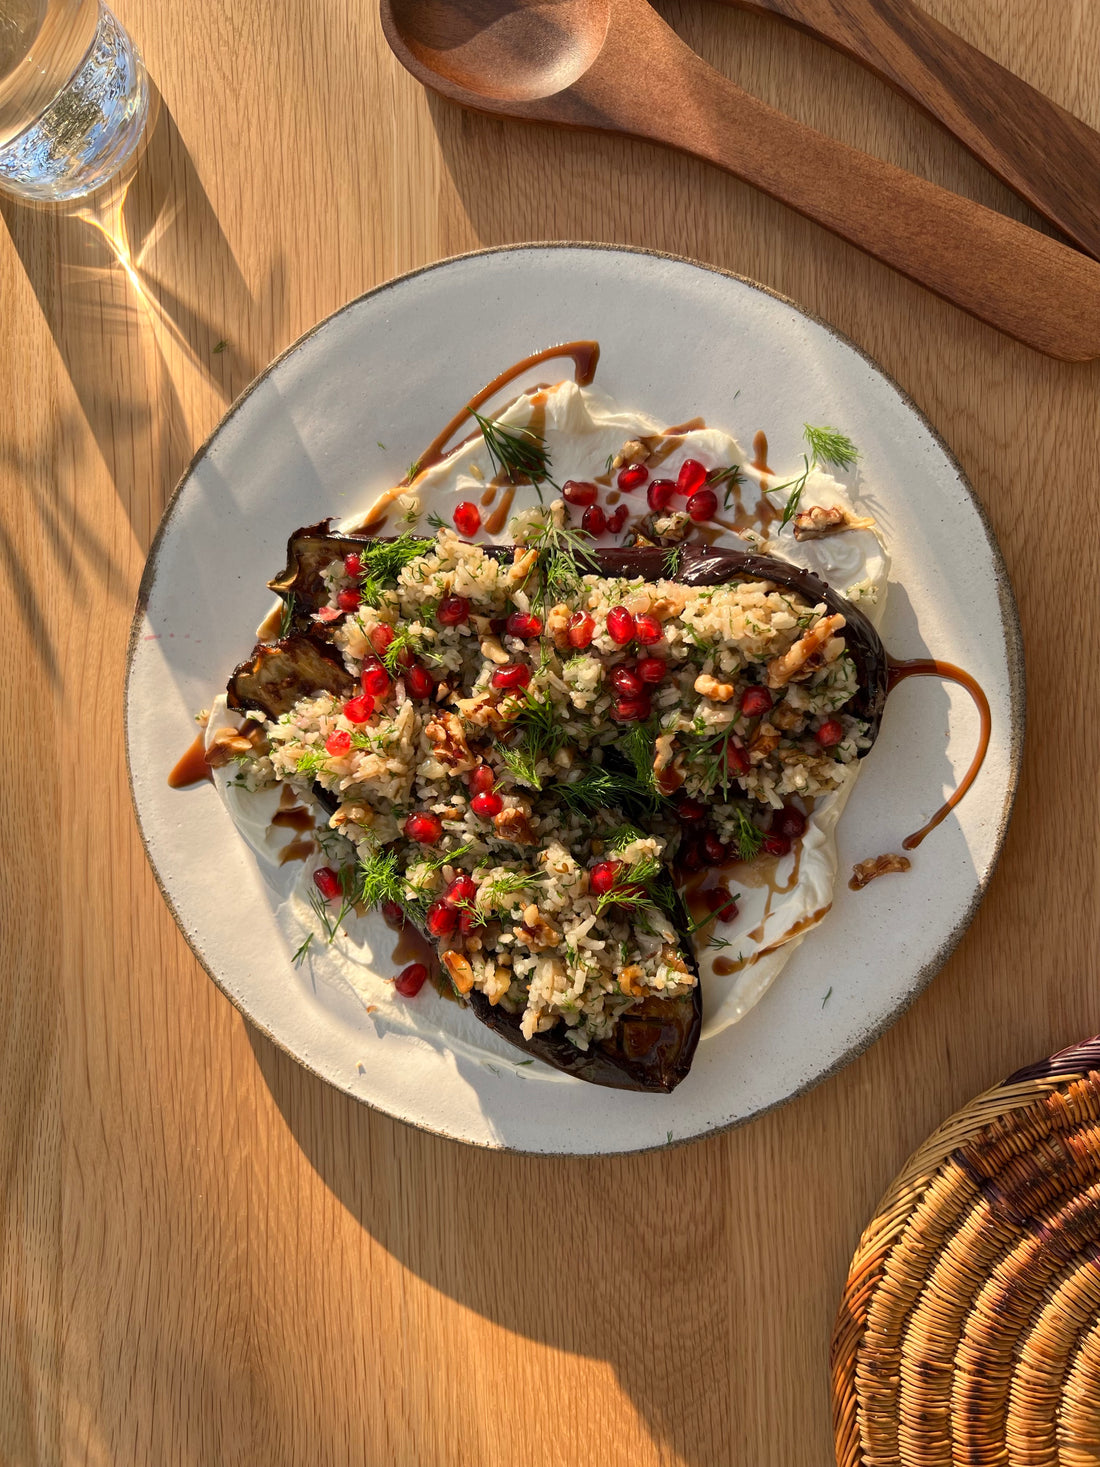 Pomegranate Molasses Roasted Eggplant with Walnut and Dill Rice